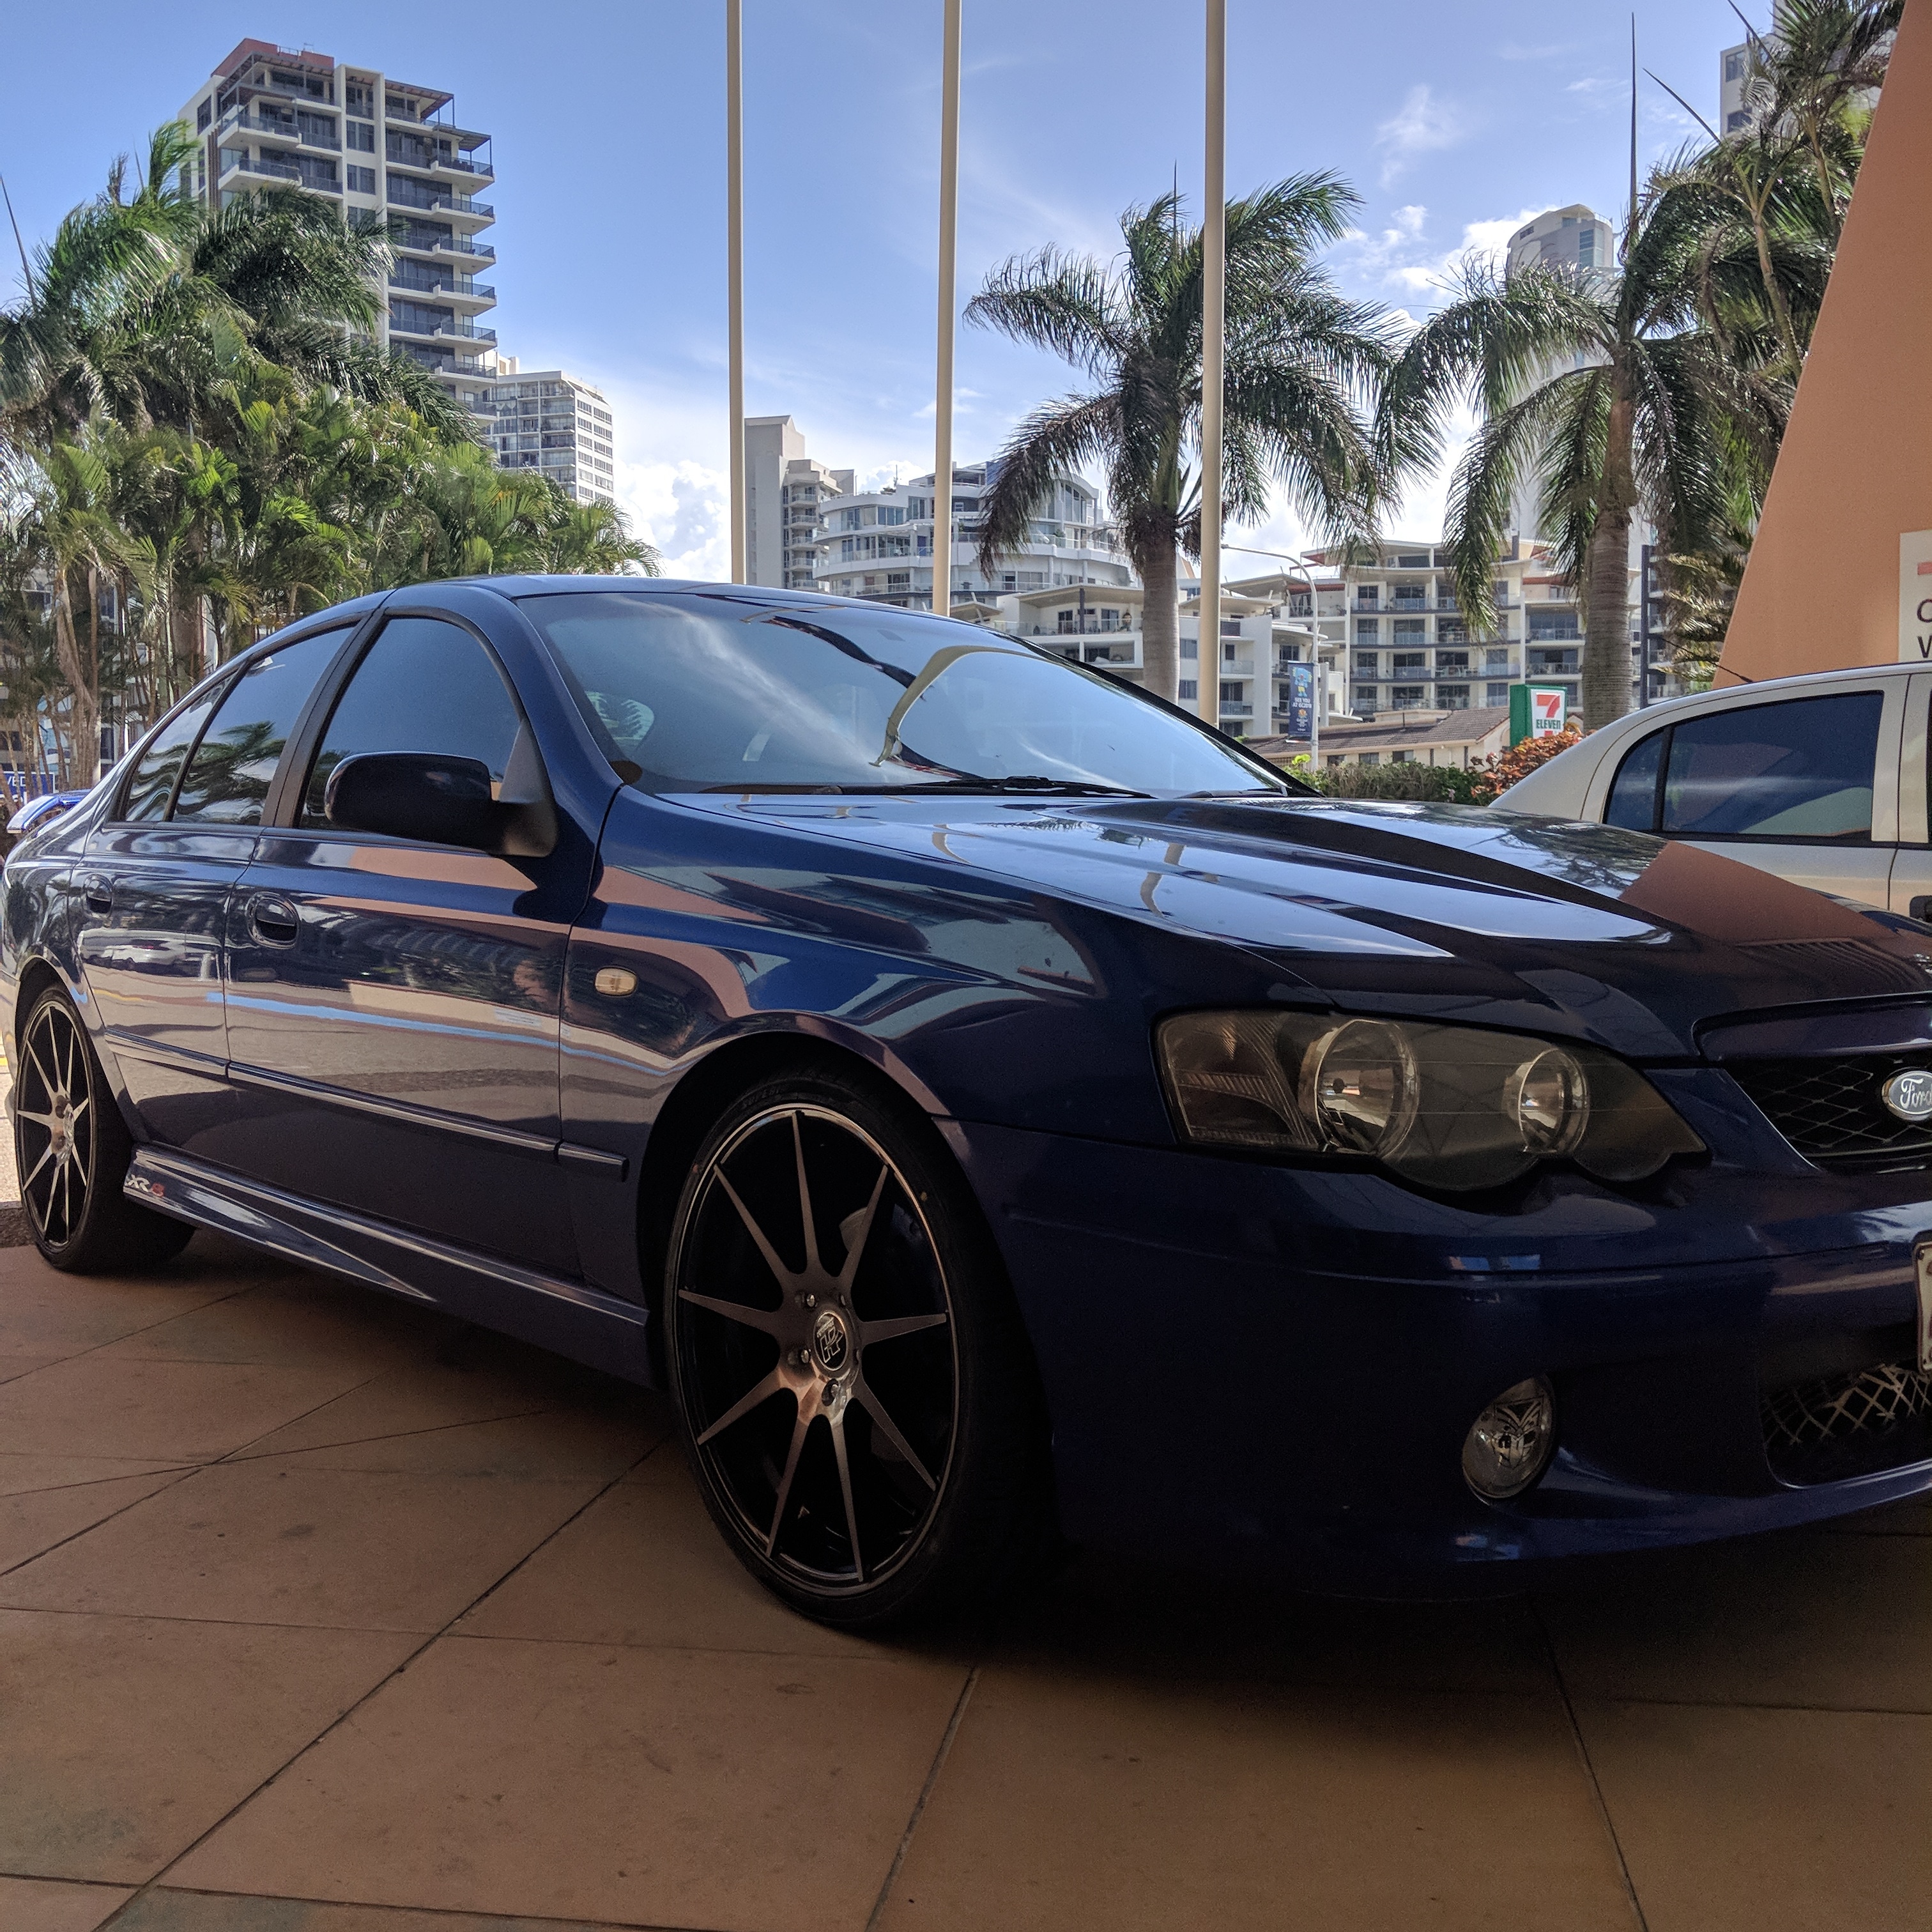 bf xr8 for sale